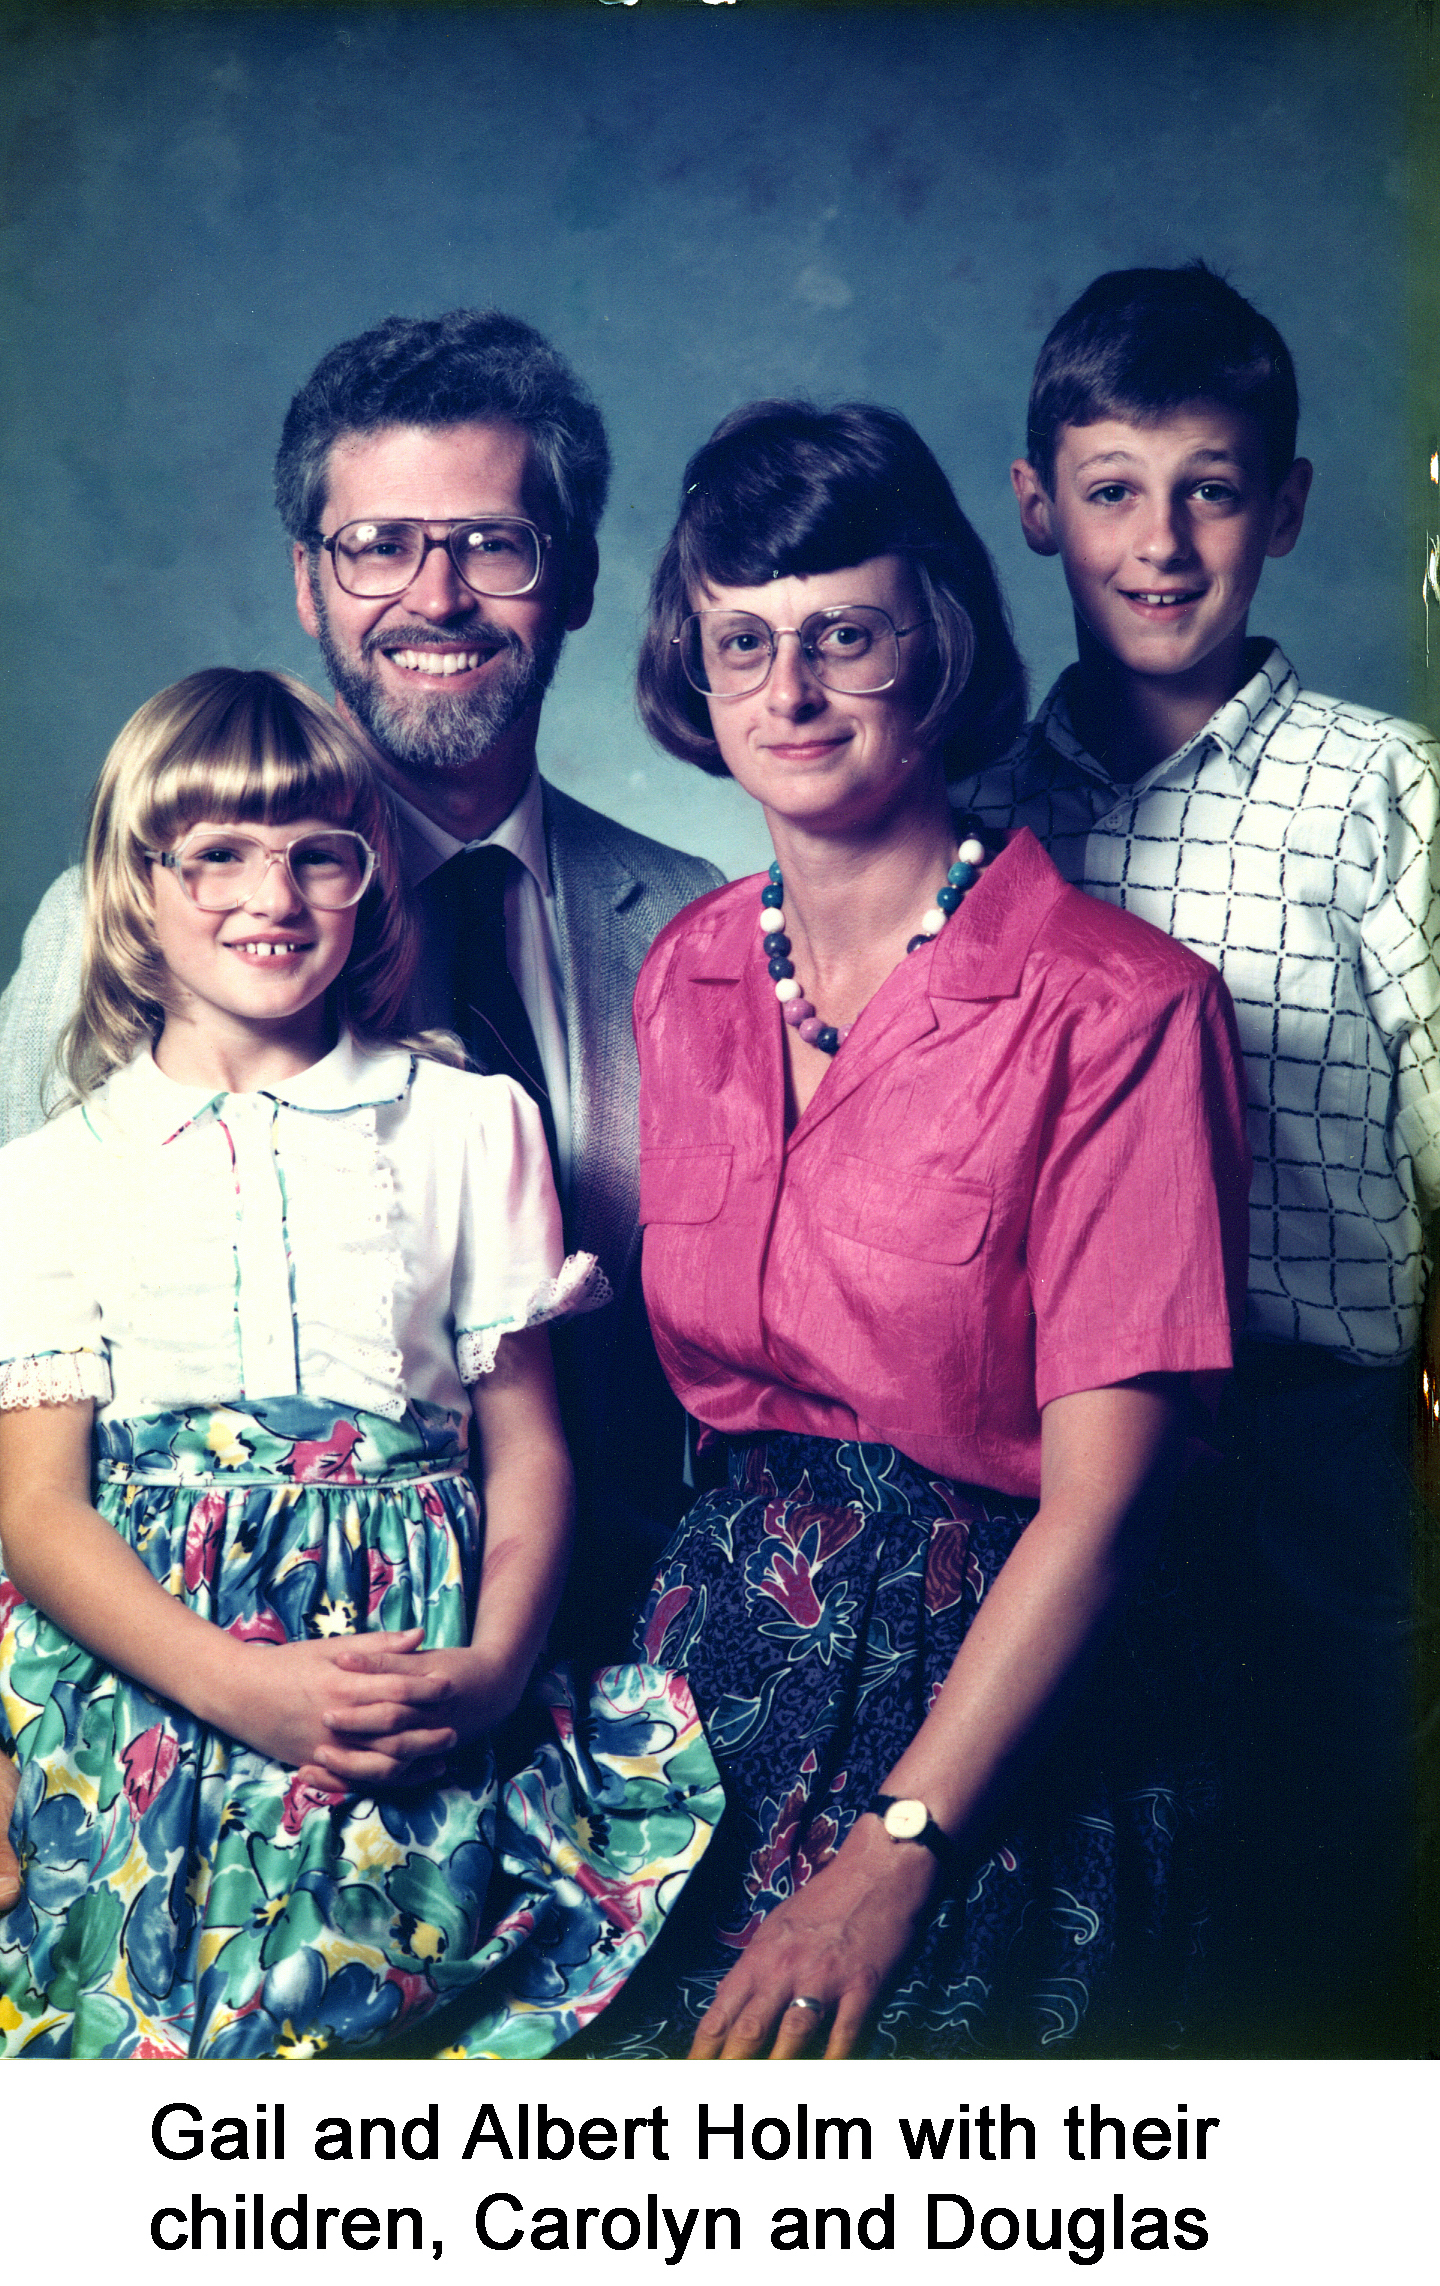 Holm family: Carolyn, Albert, Gail and Douglas in their going to church clothes